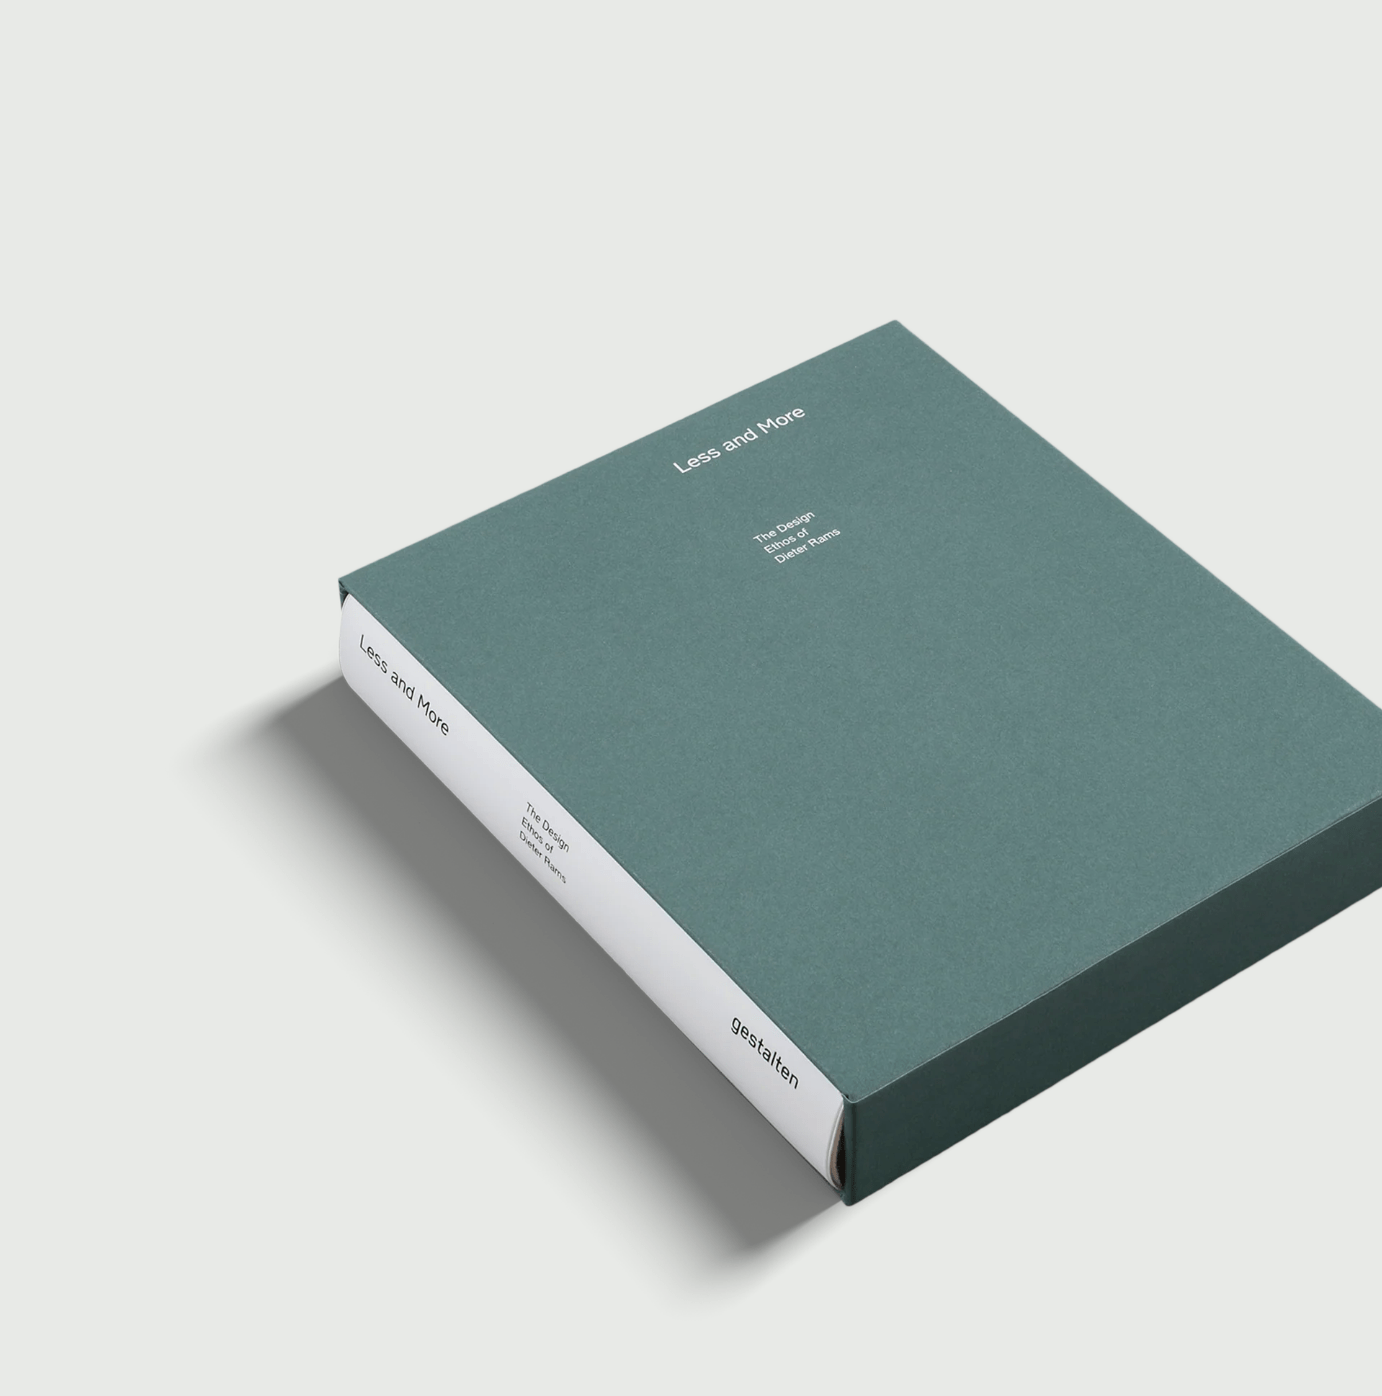 This is Dieter Rams’ bilingual 808-page book about his work, back in print in its original form with a PVC softcover and slipcase. The relevance of famous Braun designer Dieter Rams in ­modern design remains unbroken.